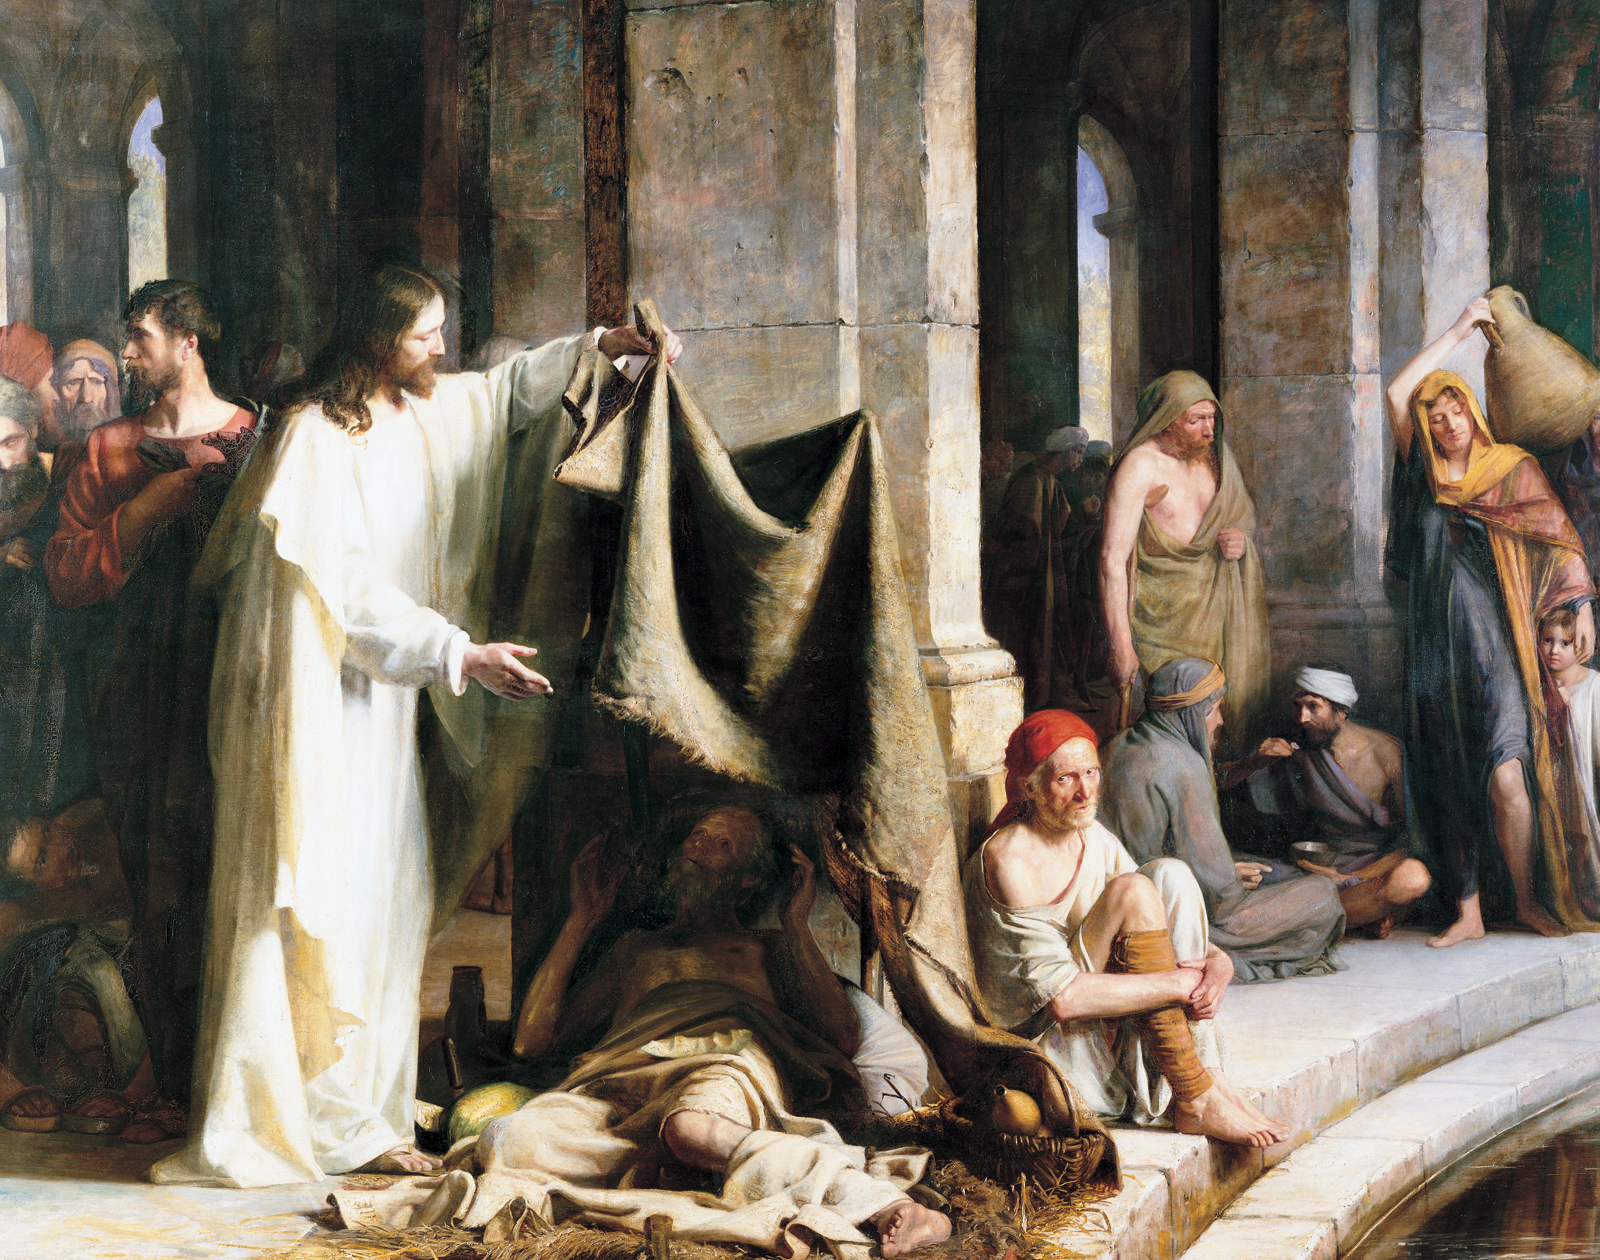 Jesus Christ raising a makeshift shelter to talk to a disabled man who is waiting in a crowd near the waters of the pool of Bethesda.